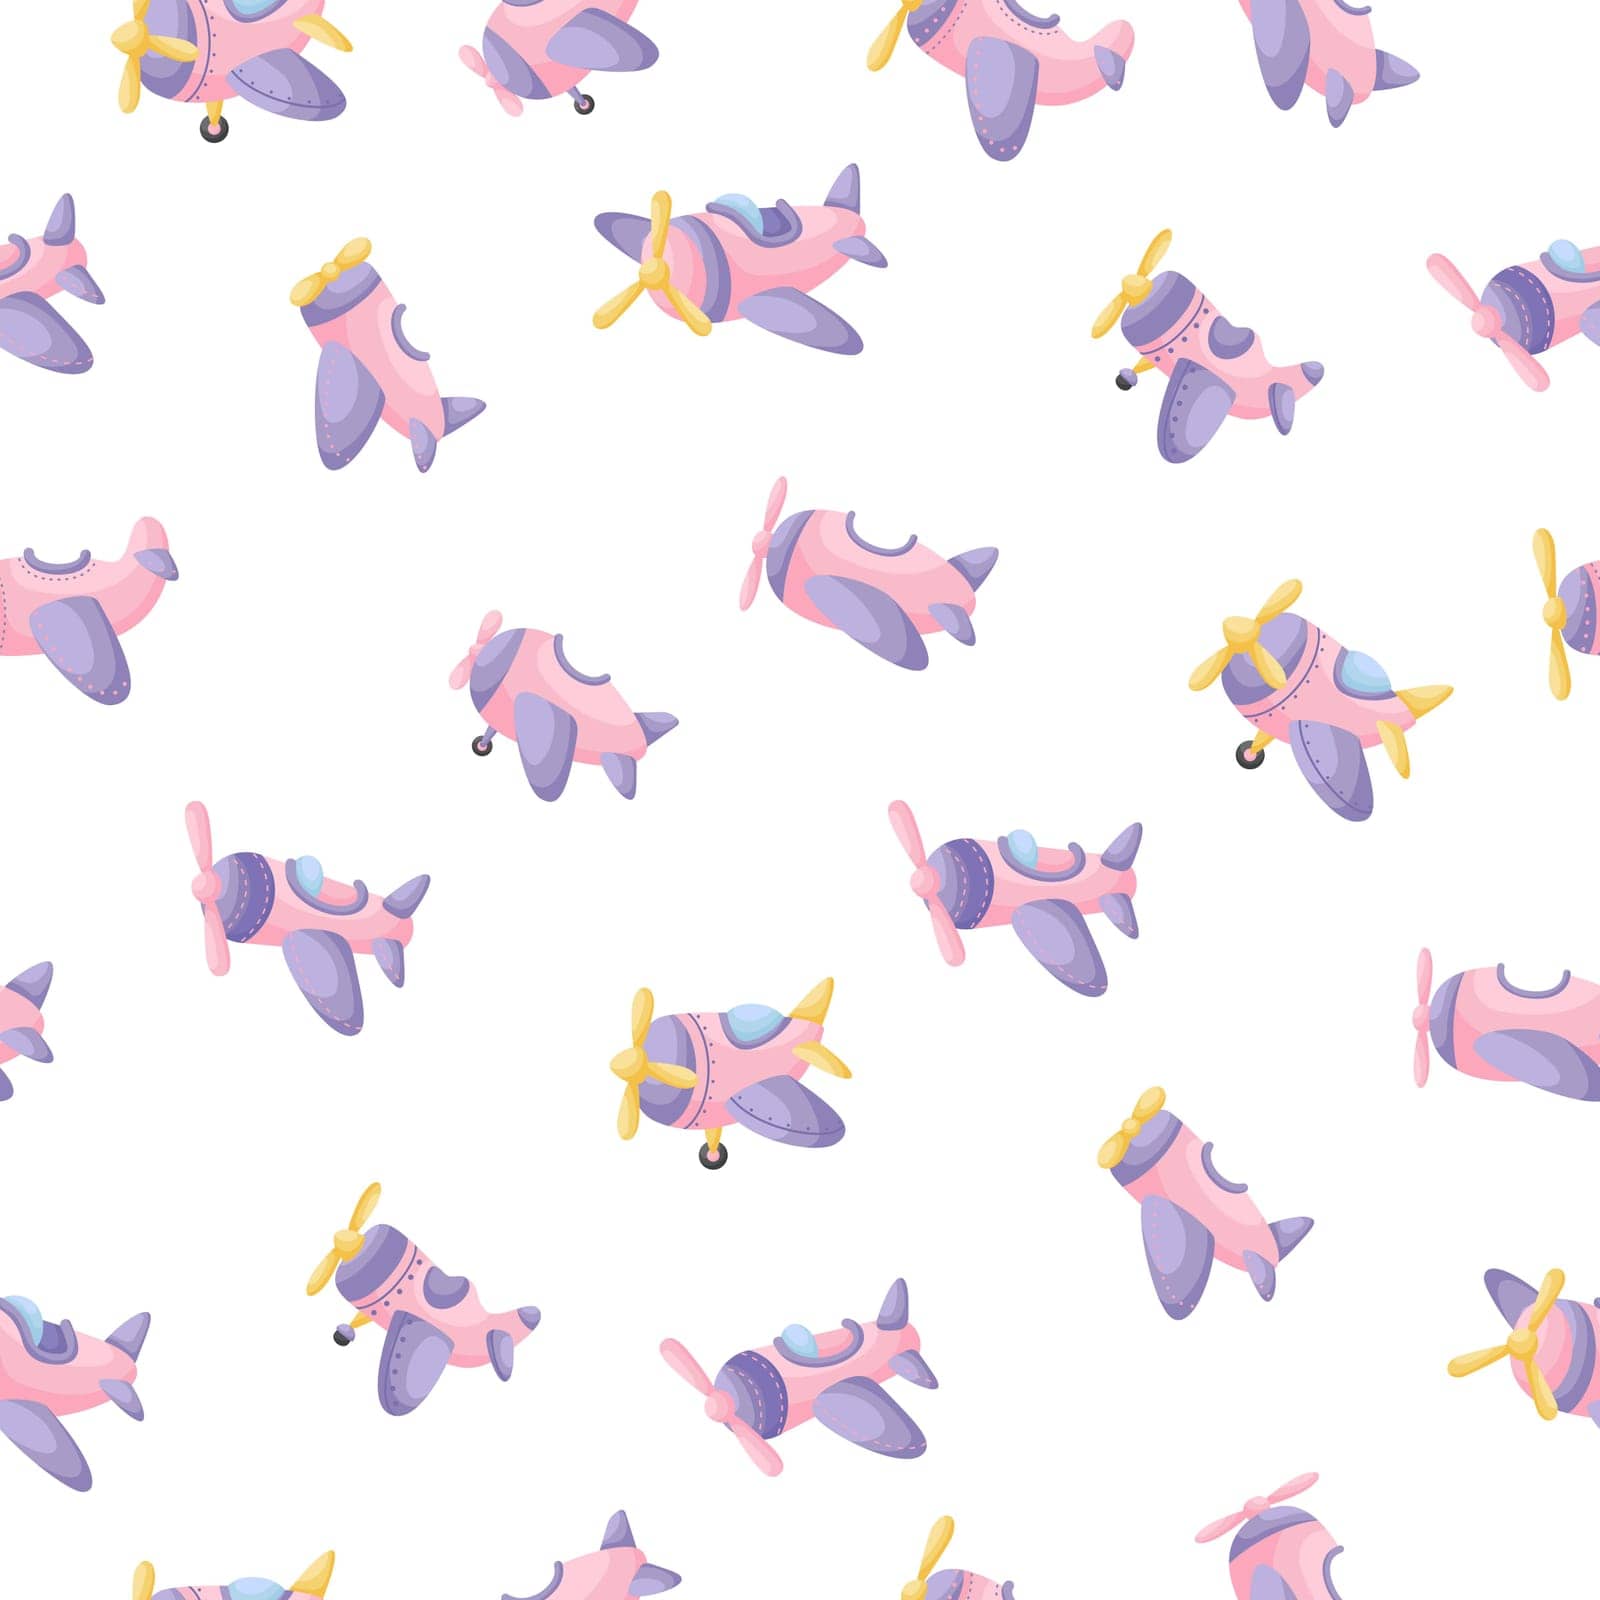 Cute children's seamless pattern with pink planes. Creative kids texture for fabric, wrapping, textile, wallpaper, apparel. Vector illustration by Melnyk